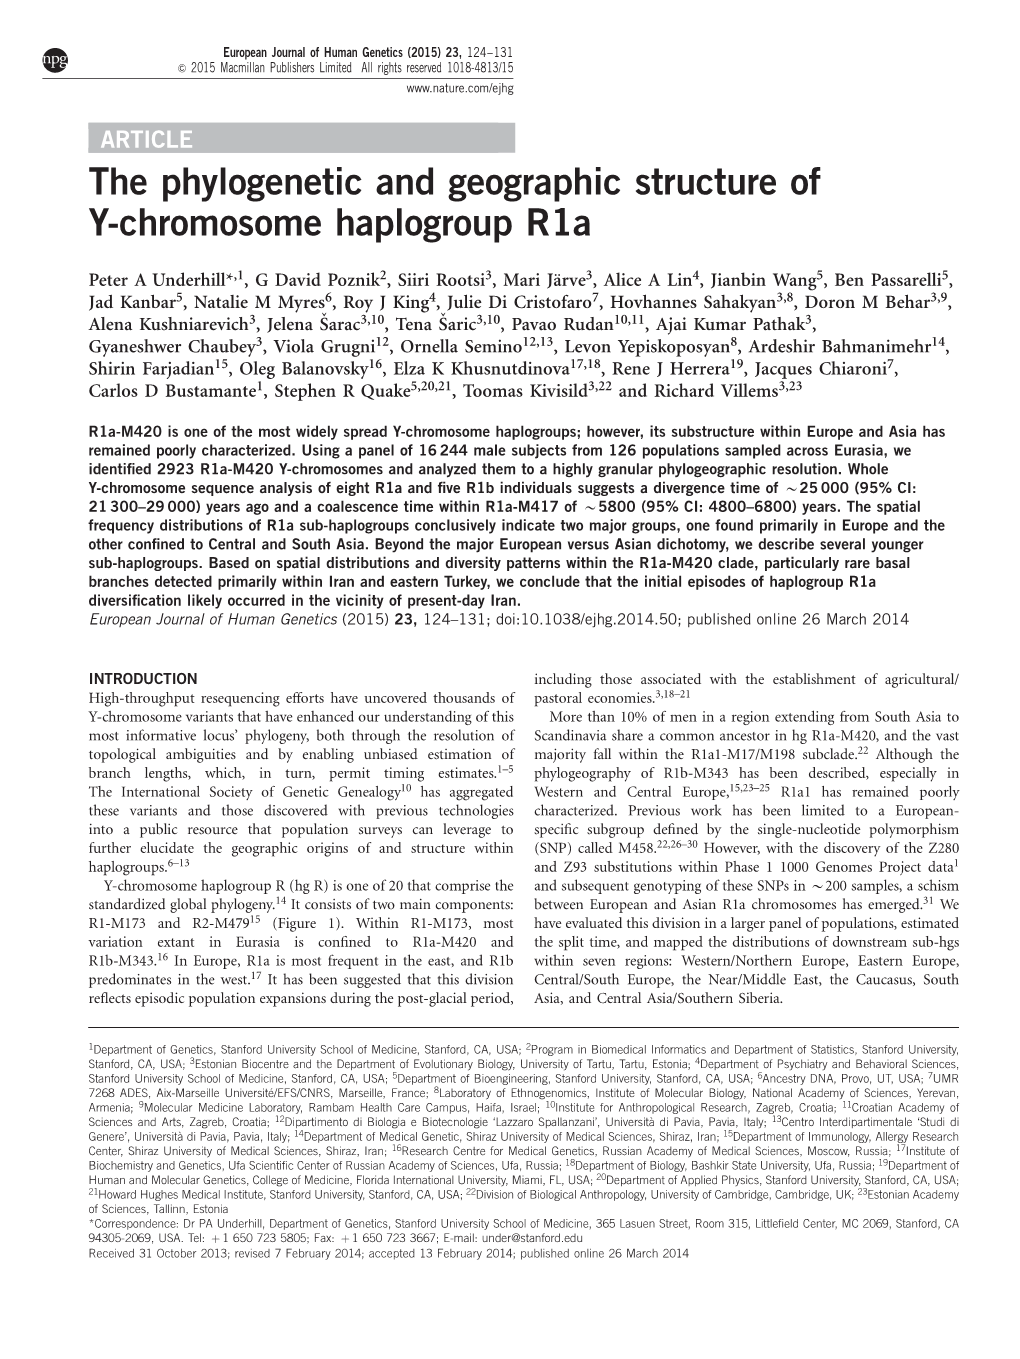 The Phylogenetic and Geographic Structure of Y-Chromosome Haplogroup R1a